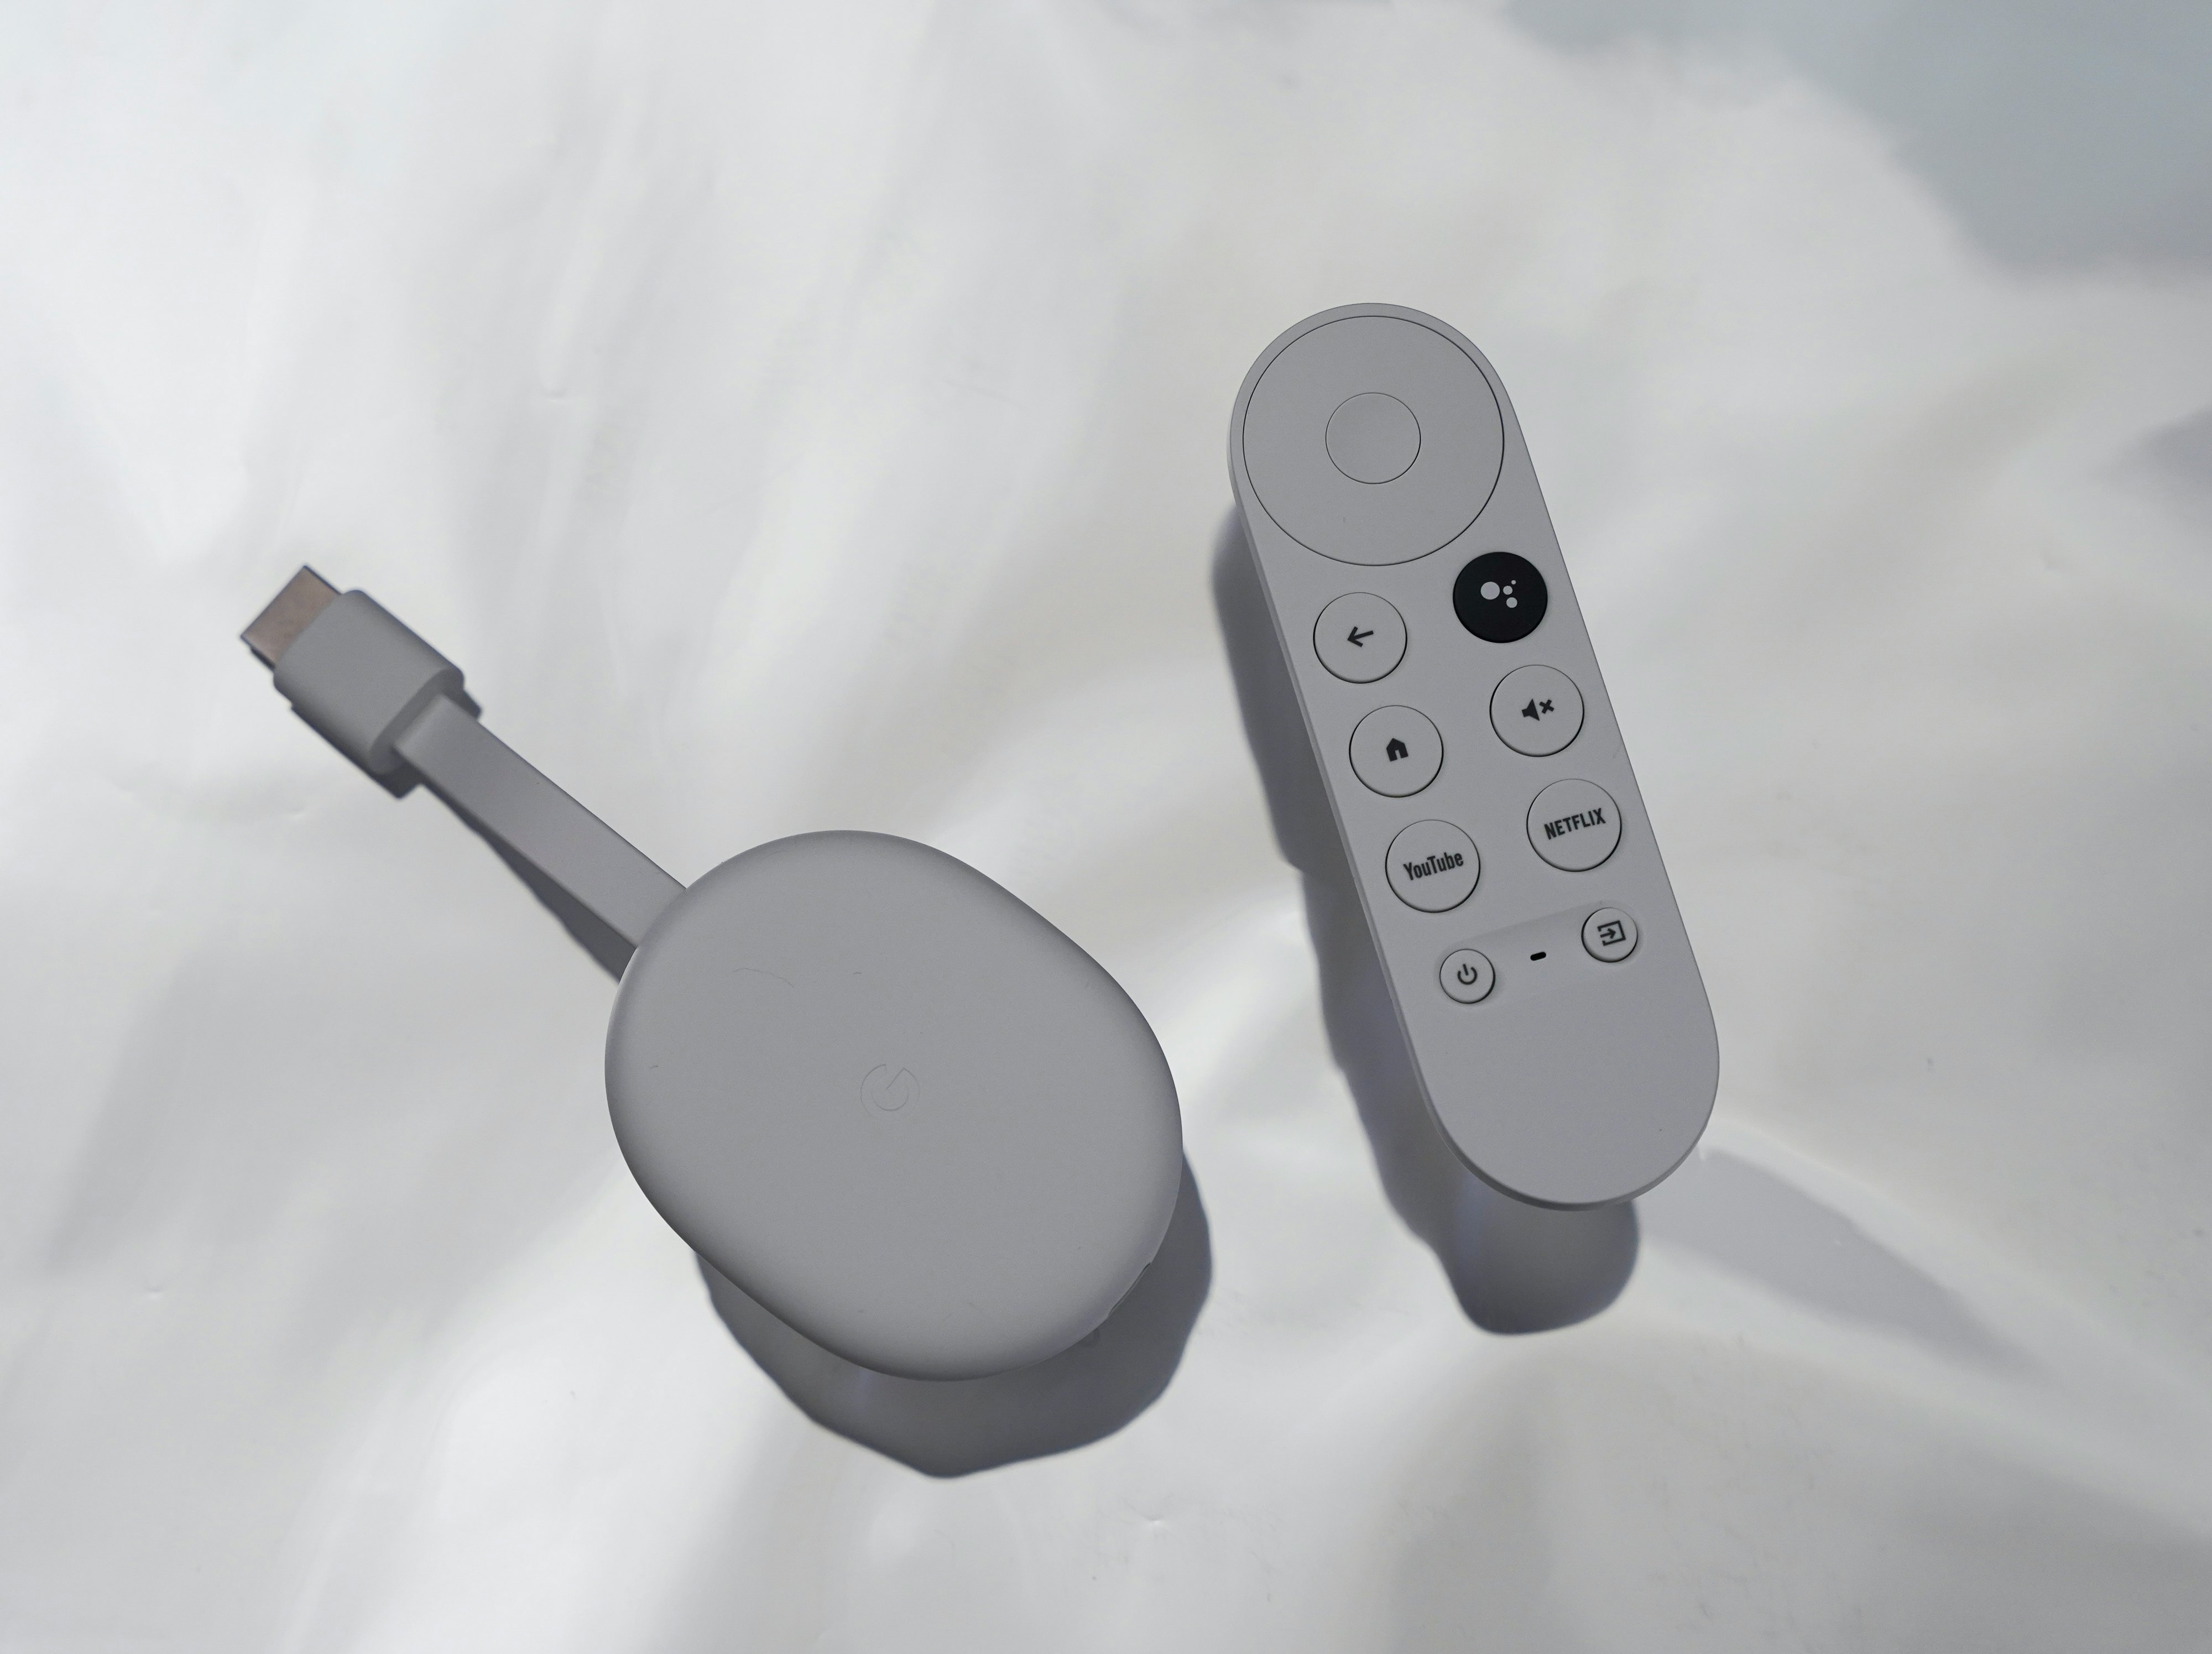 Google's new Chromecast costs $30 — and it has a remote